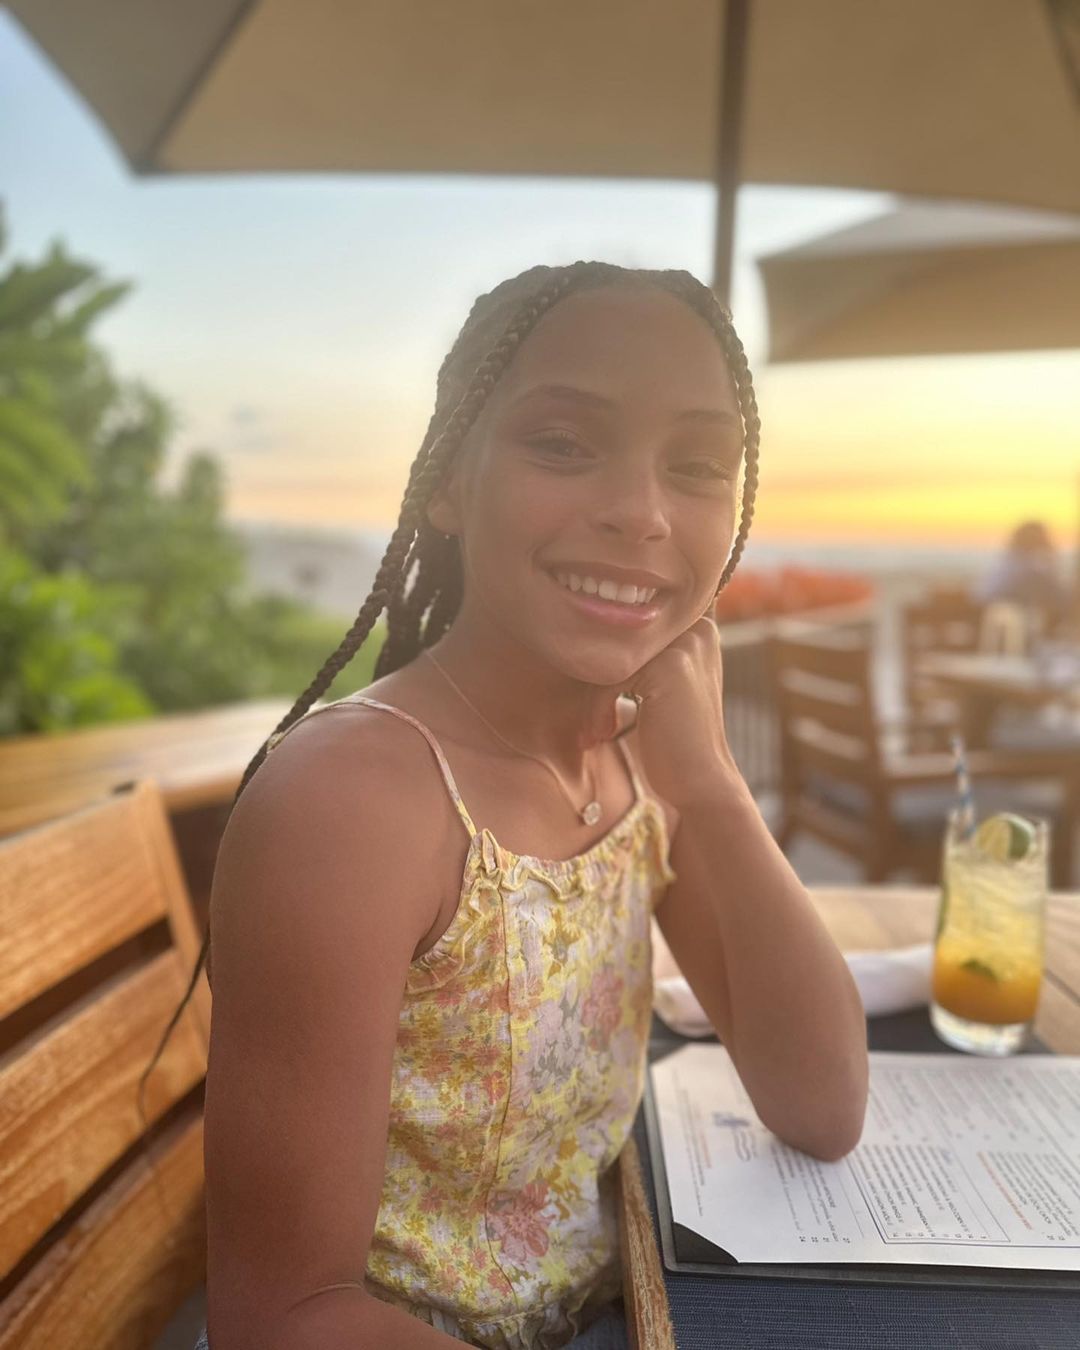 Stephen and Ayesha Curry Celebrate Daughter Riley's 11th Birthday: 'Time Has Just Flown By' - amazingdailynews.com